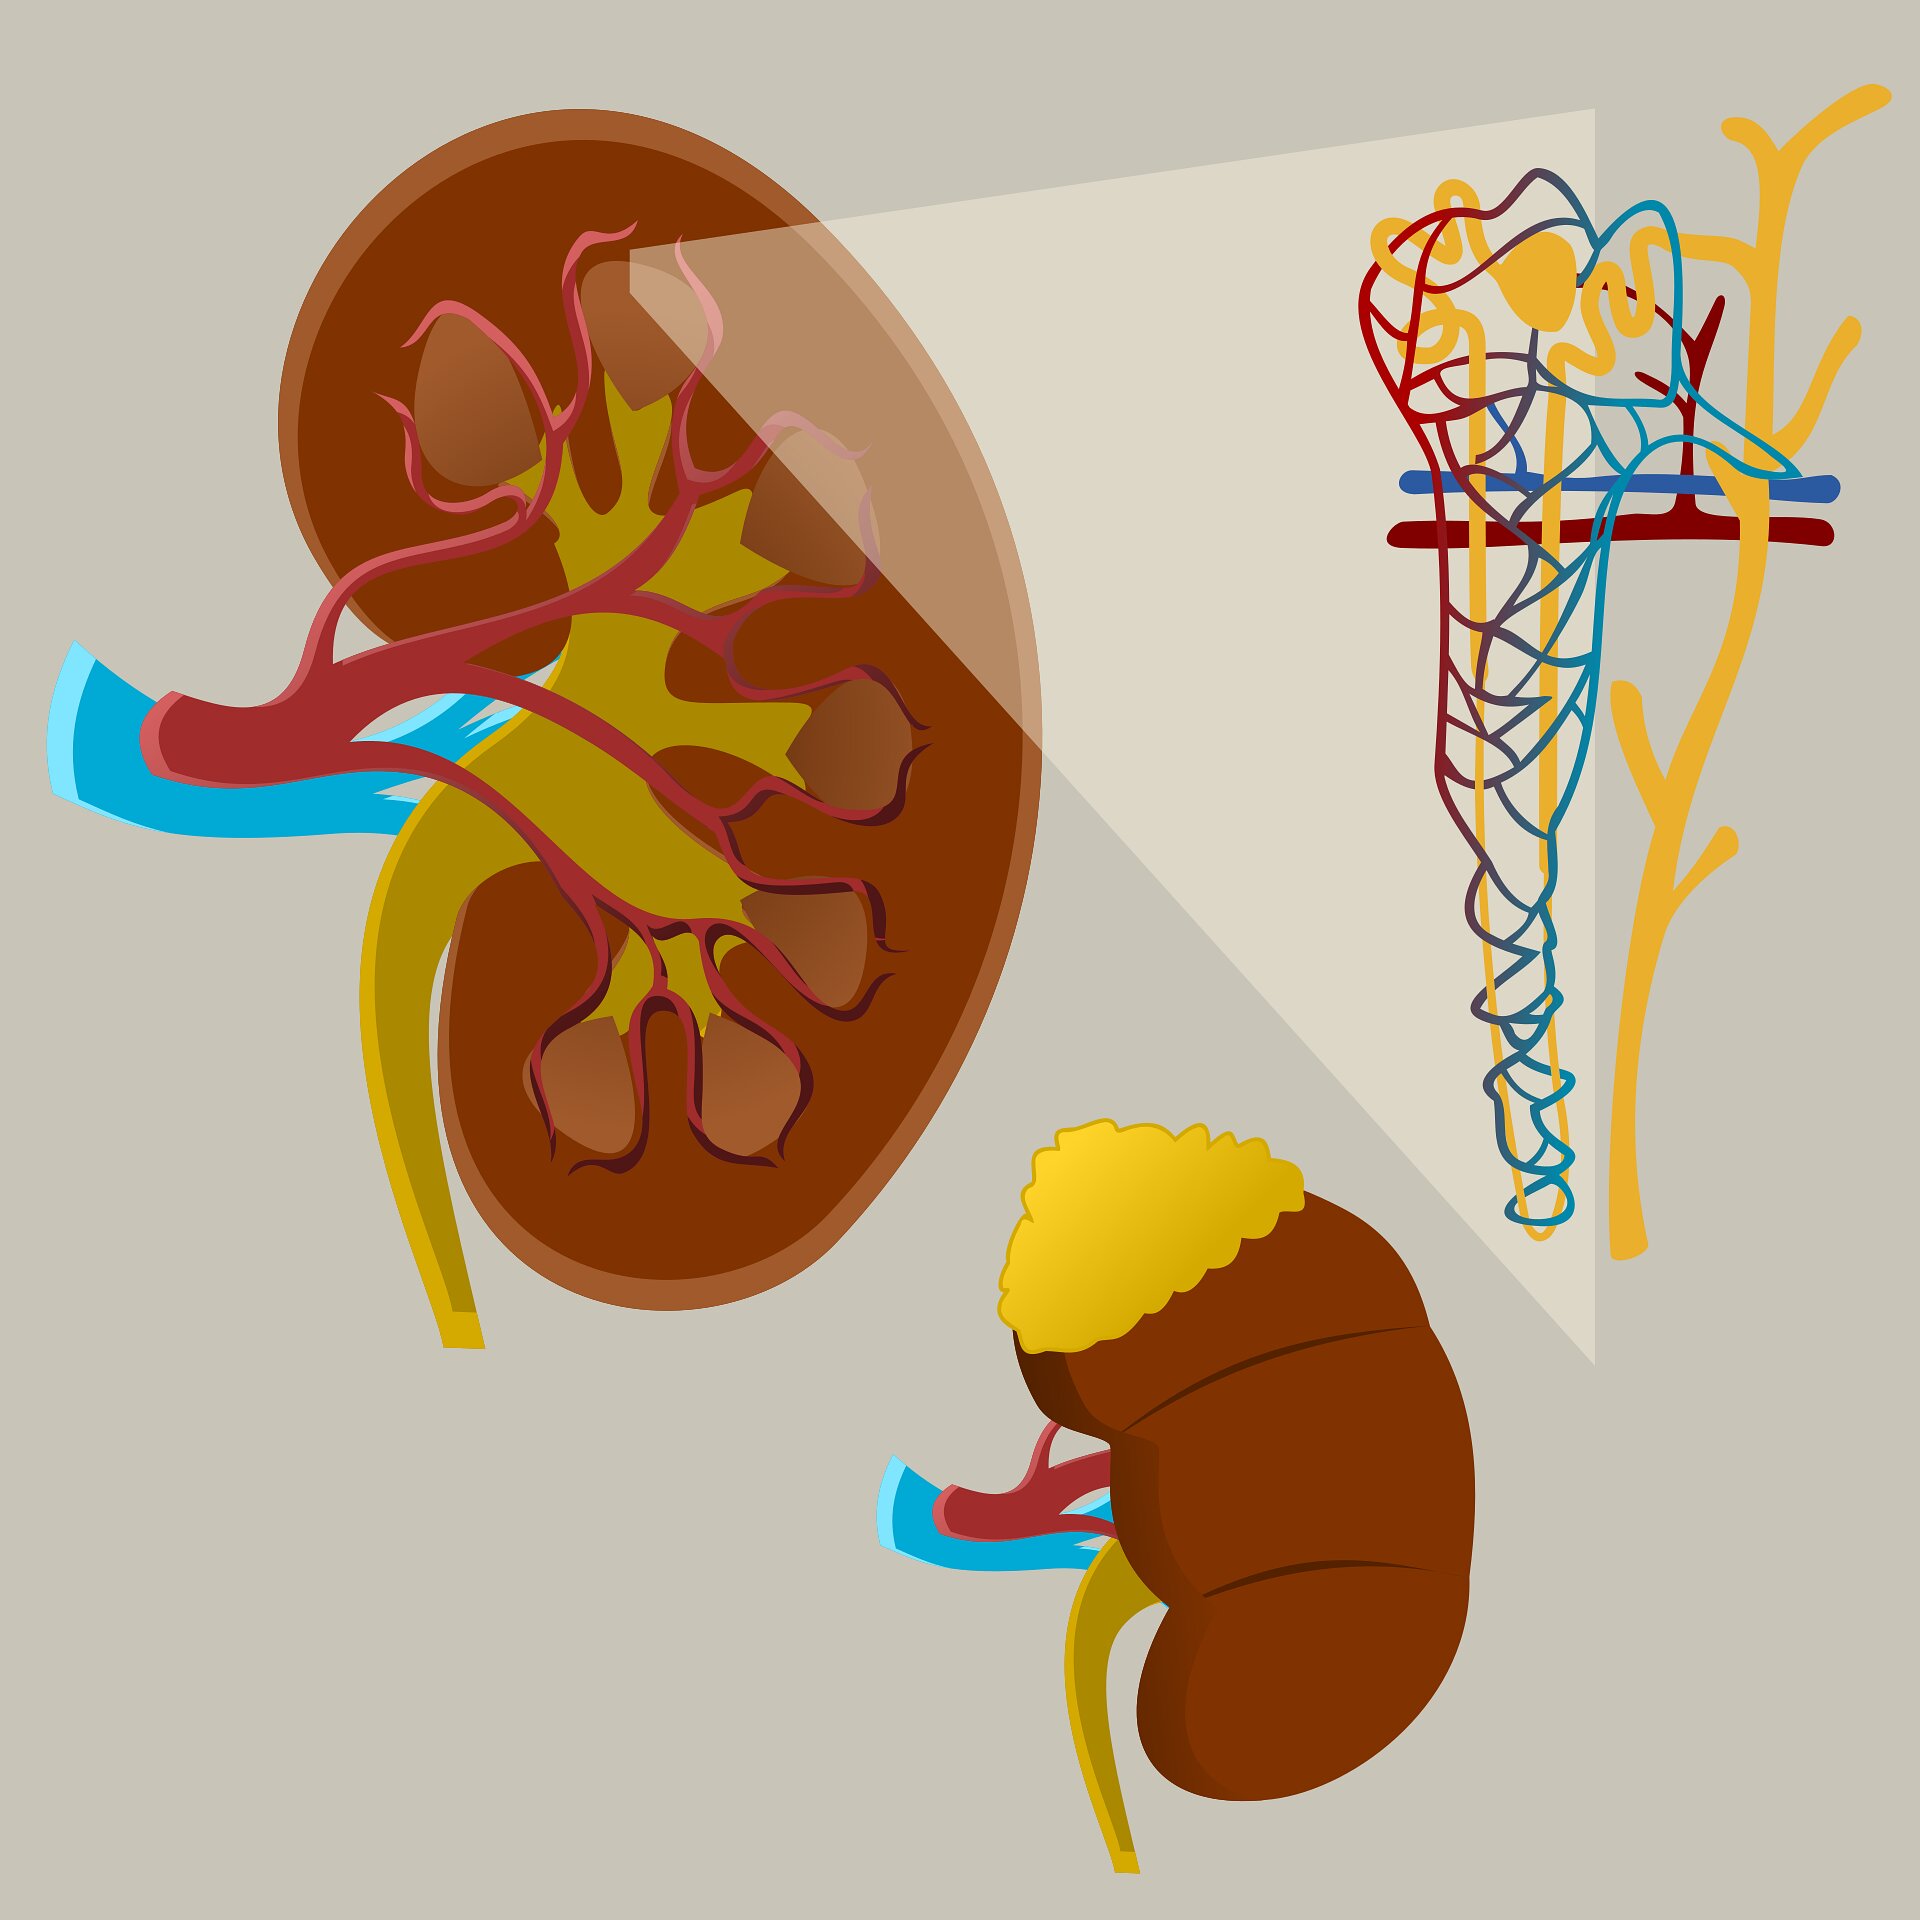 #COVID kidney injury may be twice as common as diagnosed